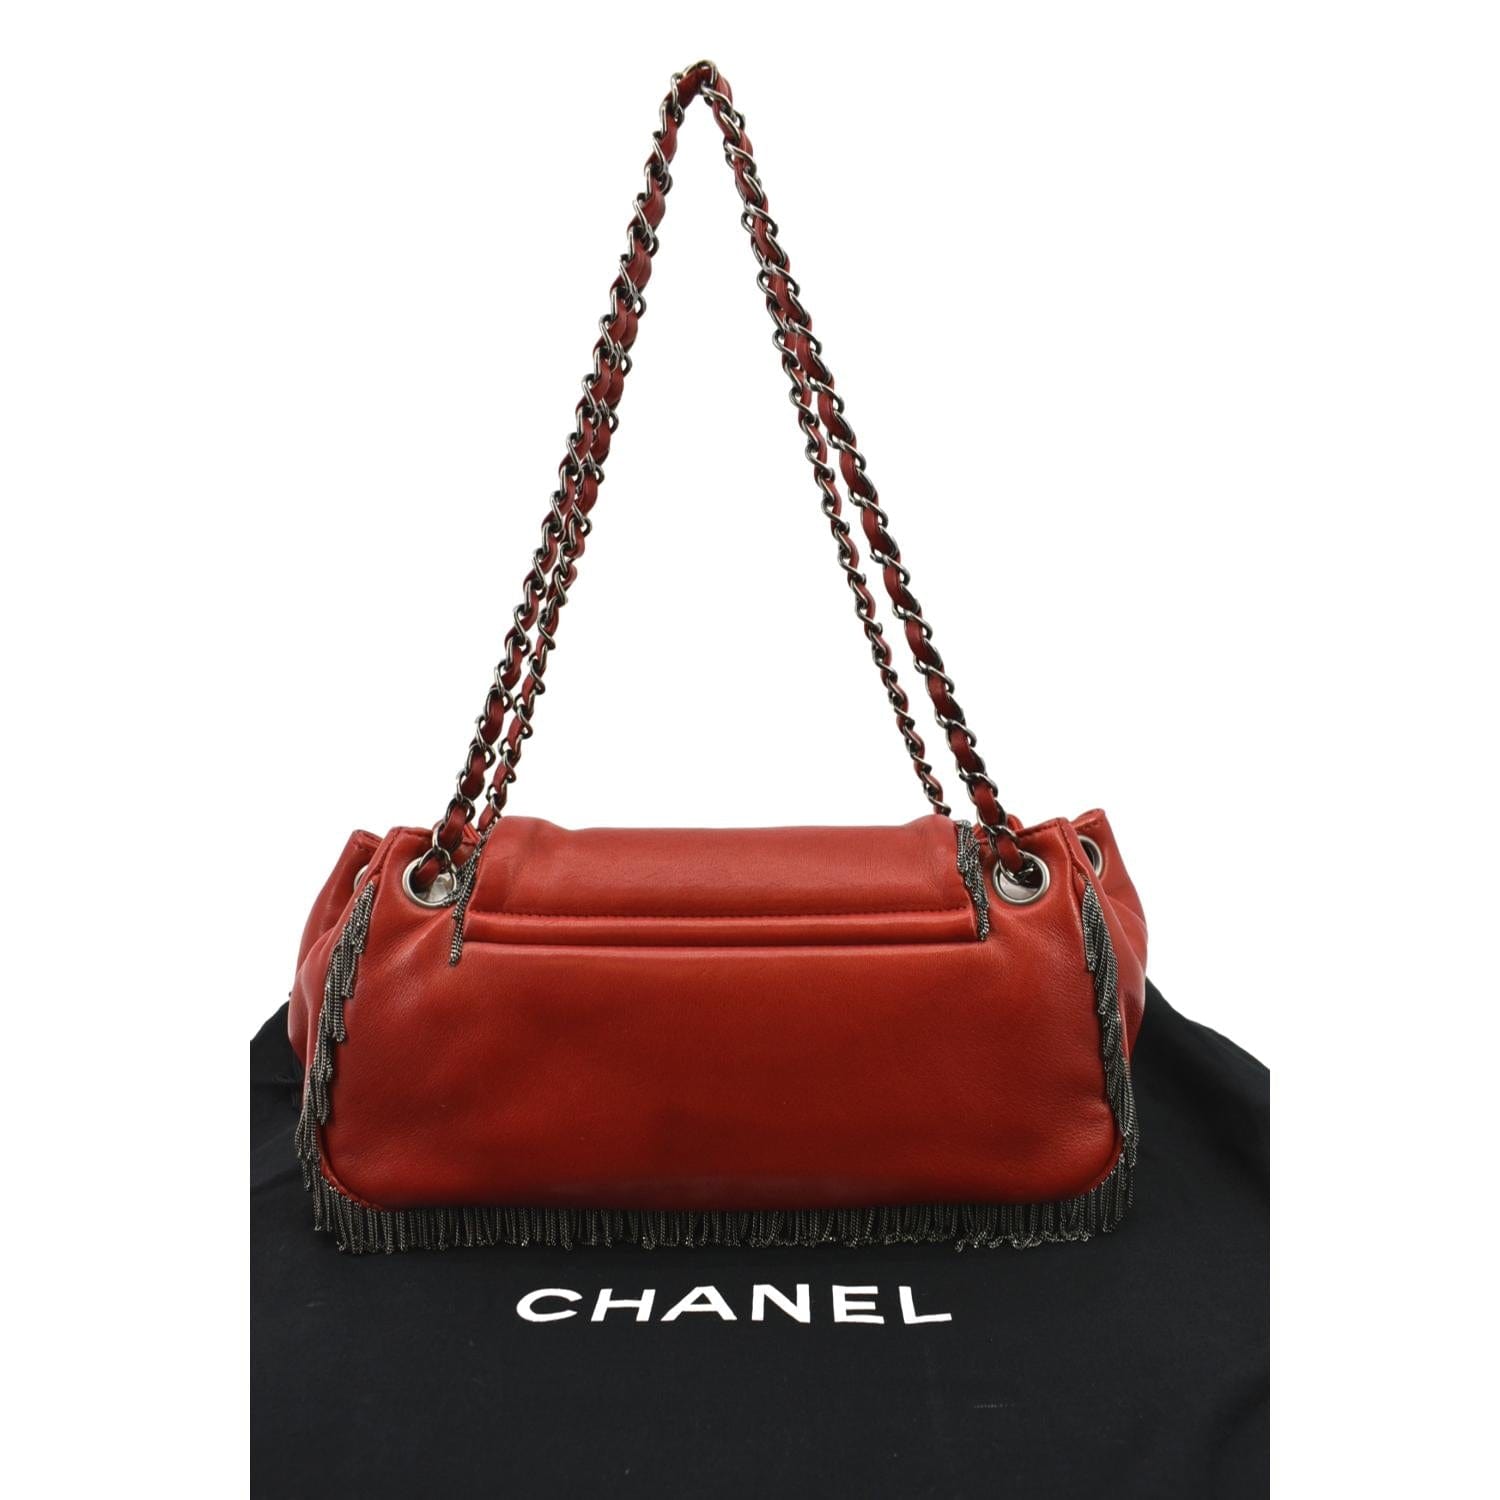 Chanel Classic Maxi Flap On Sale - Authenticated Resale